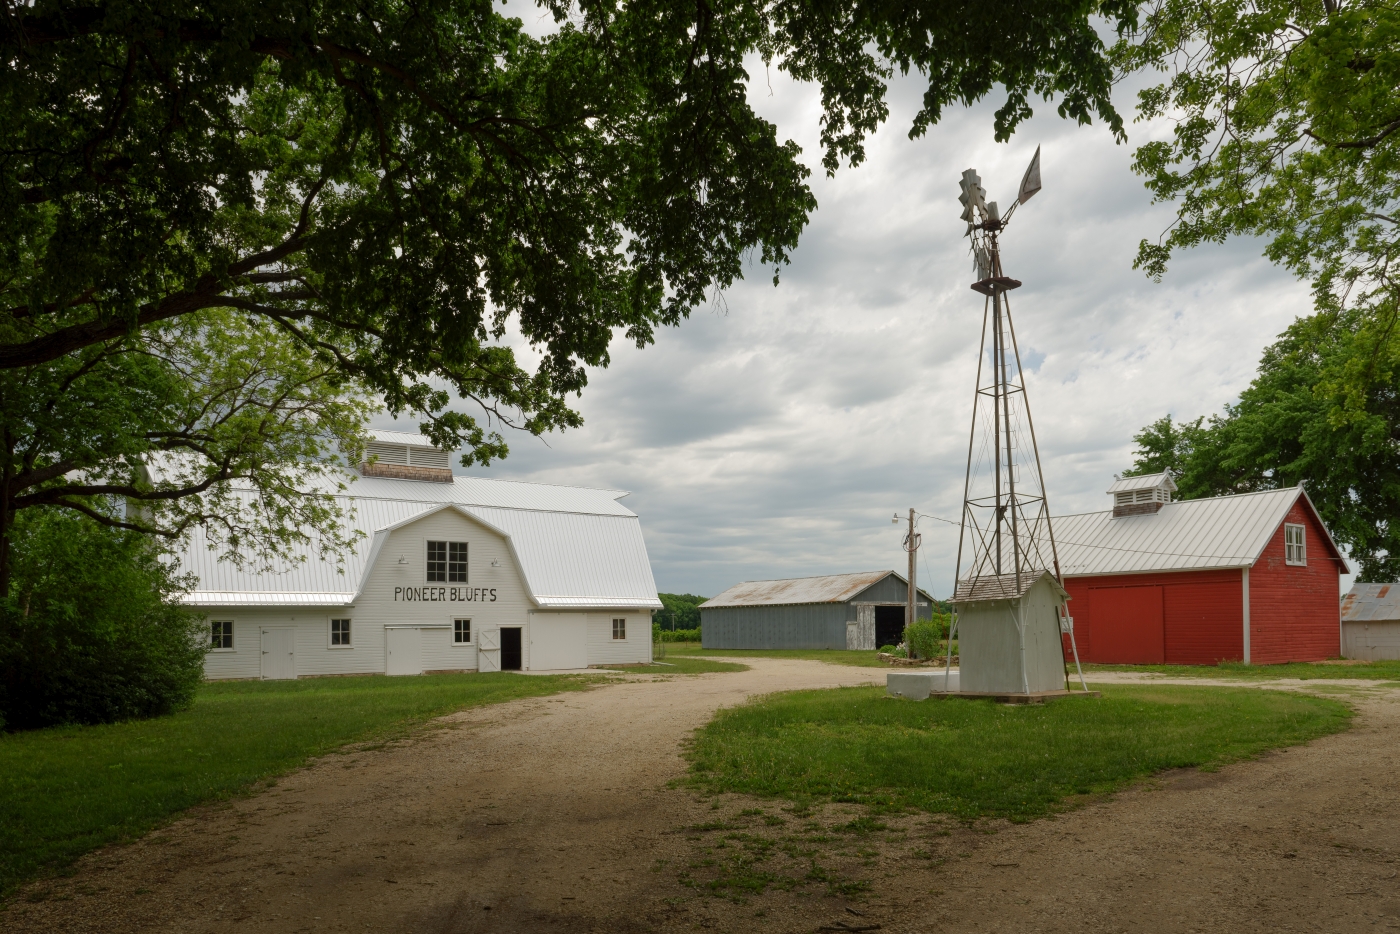 View of windmill with trees, main barn and curving driveway